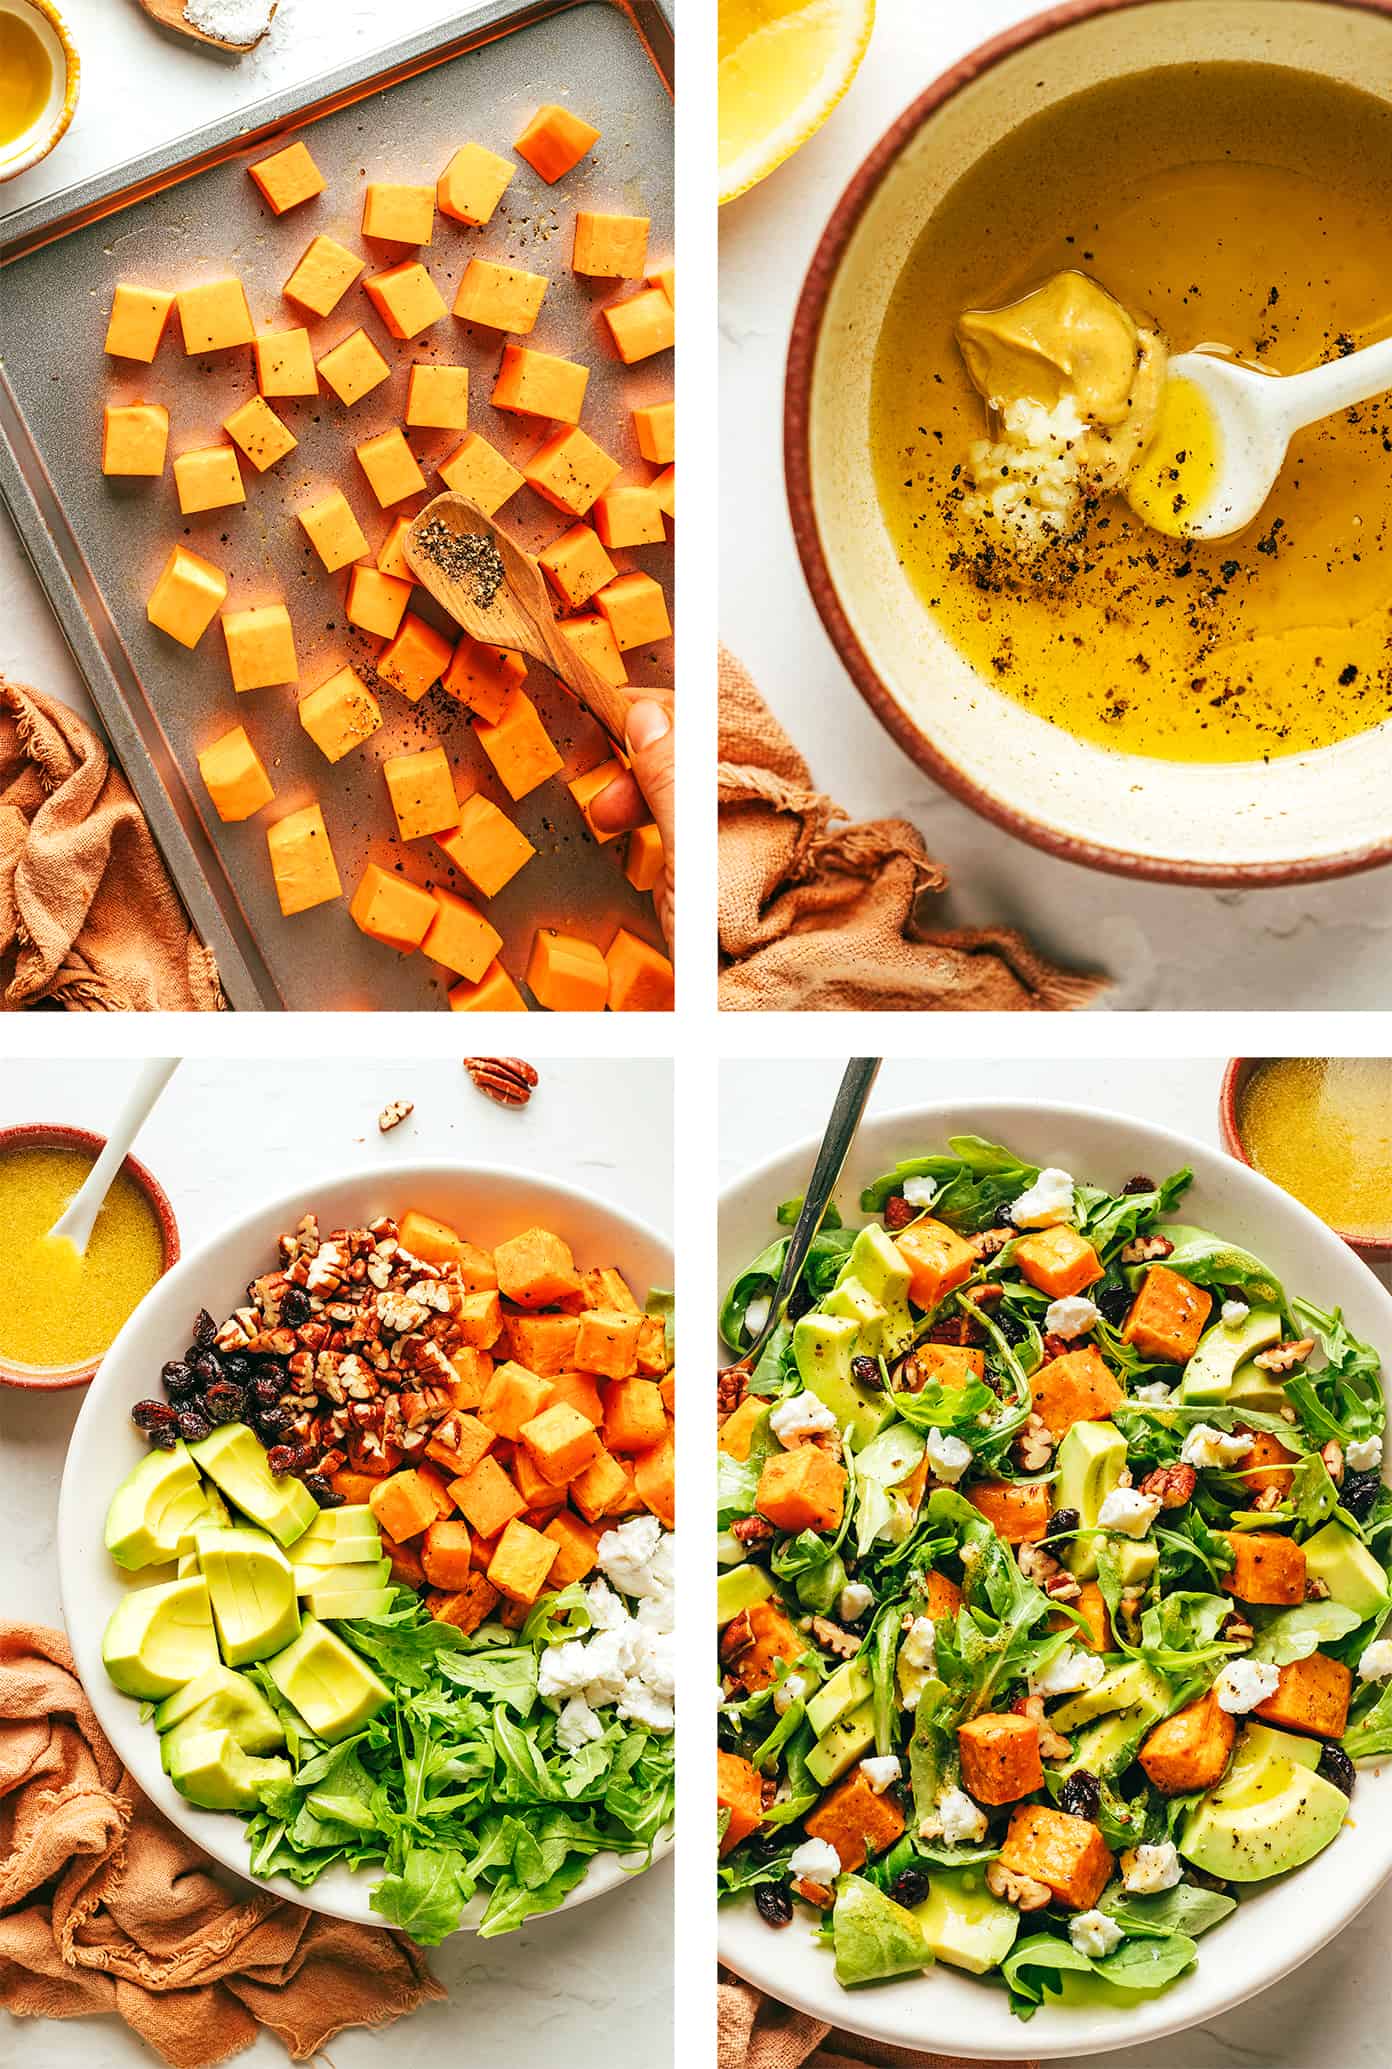 Step by step instructions for how to make favorite fall salad